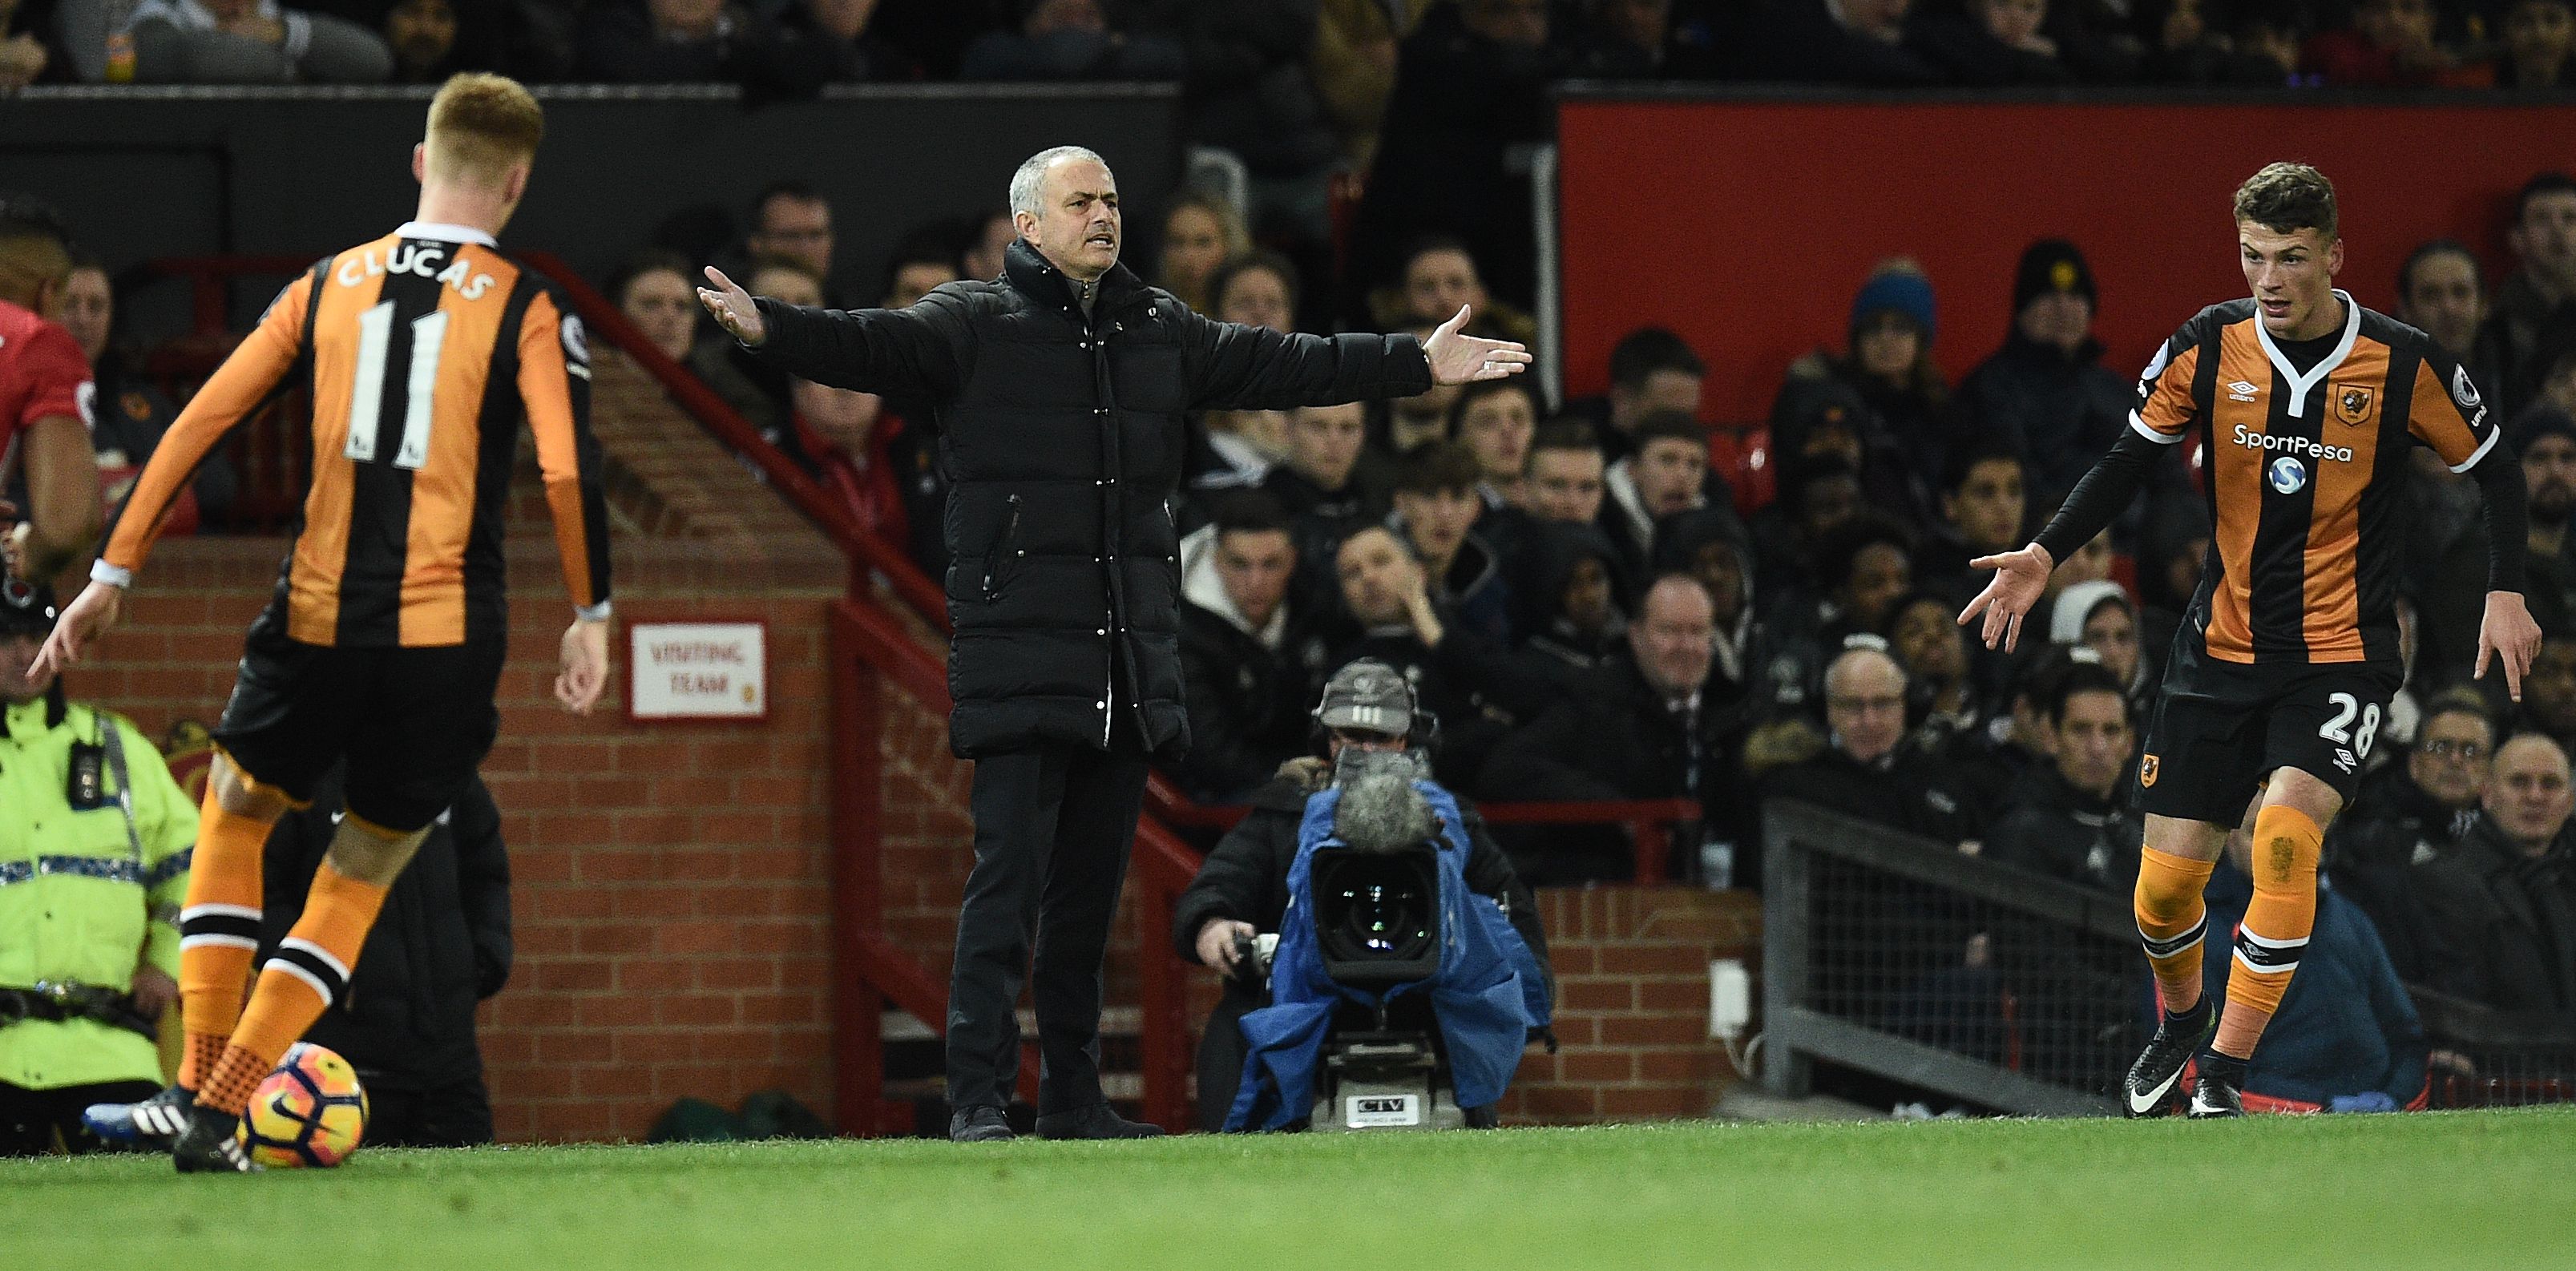 Manchester United's Portuguese manager Jose Mourinho shouts instructions to his players from the touchline during the English Premier League football match between Manchester United and Hull City at Old Trafford in Manchester, north west England, on February 1, 2017. / AFP / Oli SCARFF / RESTRICTED TO EDITORIAL USE. No use with unauthorized audio, video, data, fixture lists, club/league logos or 'live' services. Online in-match use limited to 75 images, no video emulation. No use in betting, games or single club/league/player publications.  /         (Photo credit should read OLI SCARFF/AFP/Getty Images)